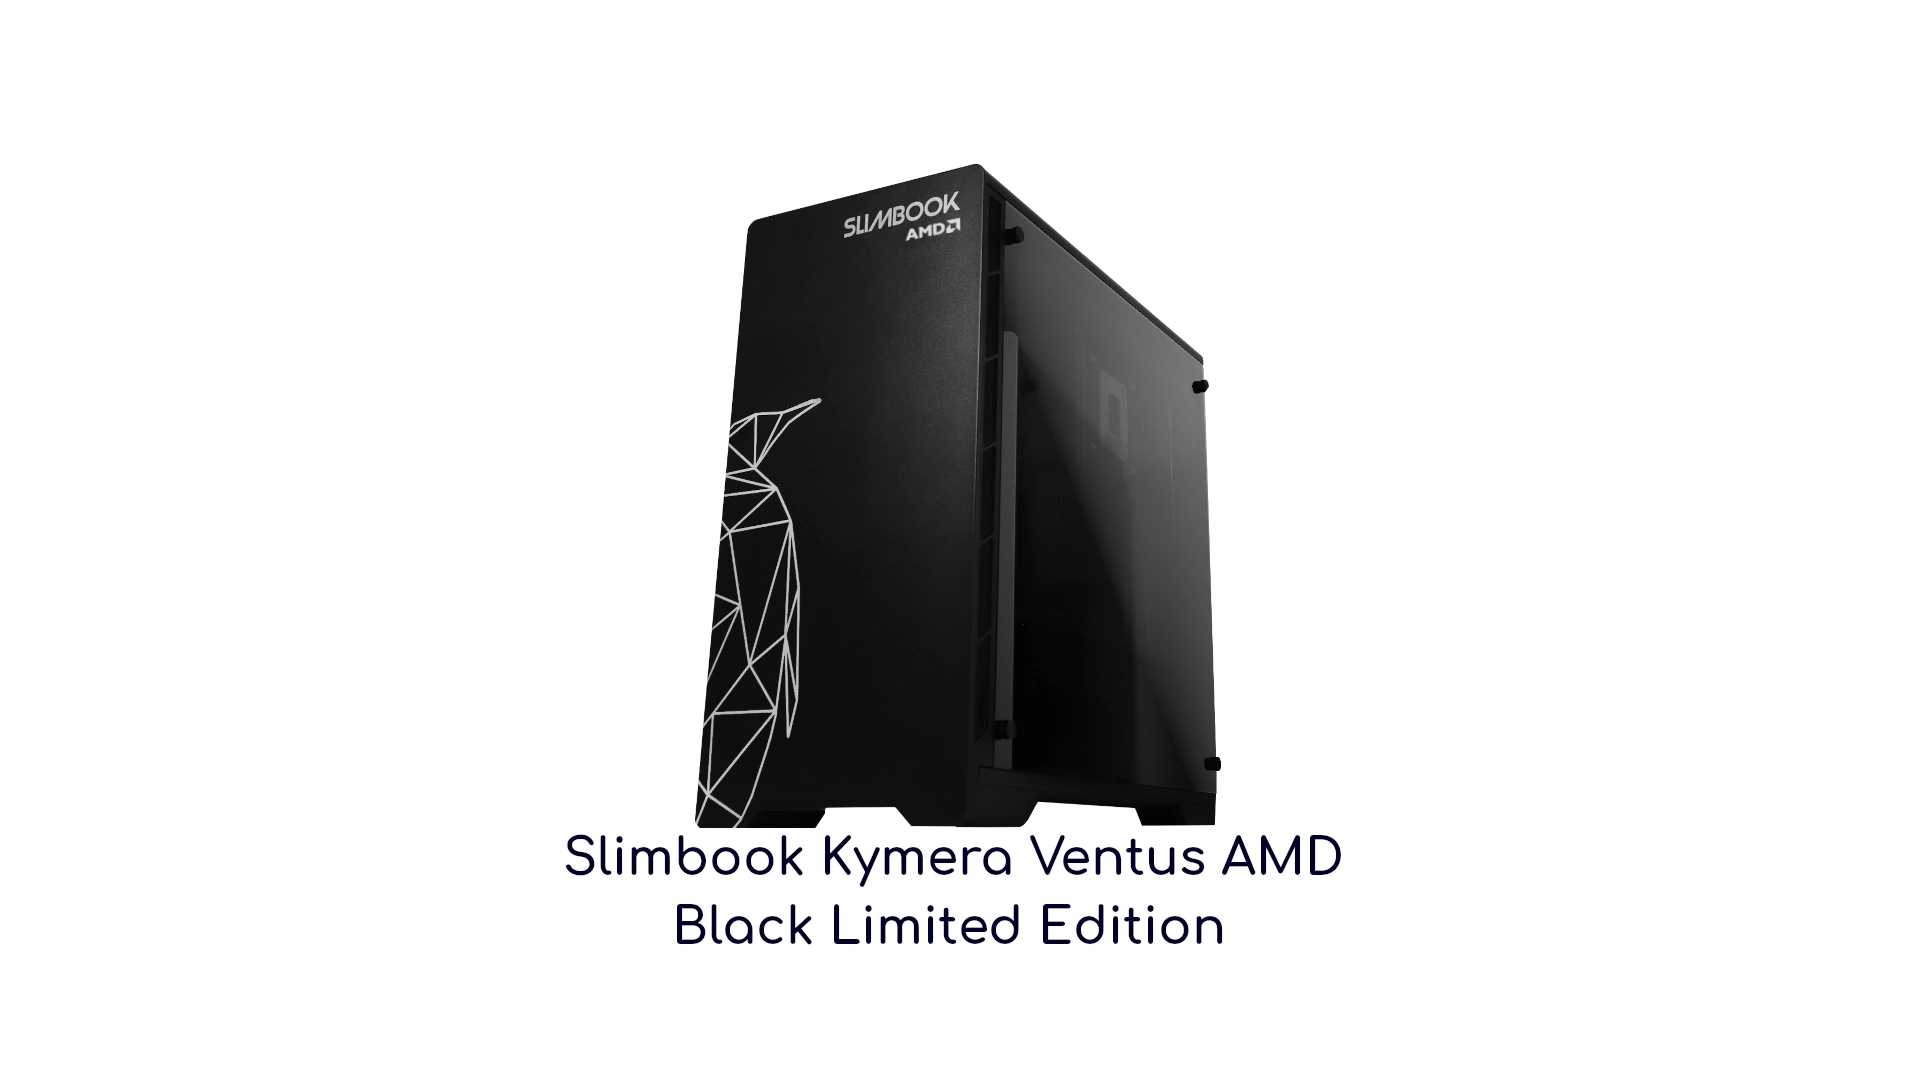 Meet the Slimbook Kymera Ventus AMD Black Limited Edition Linux Gaming PC